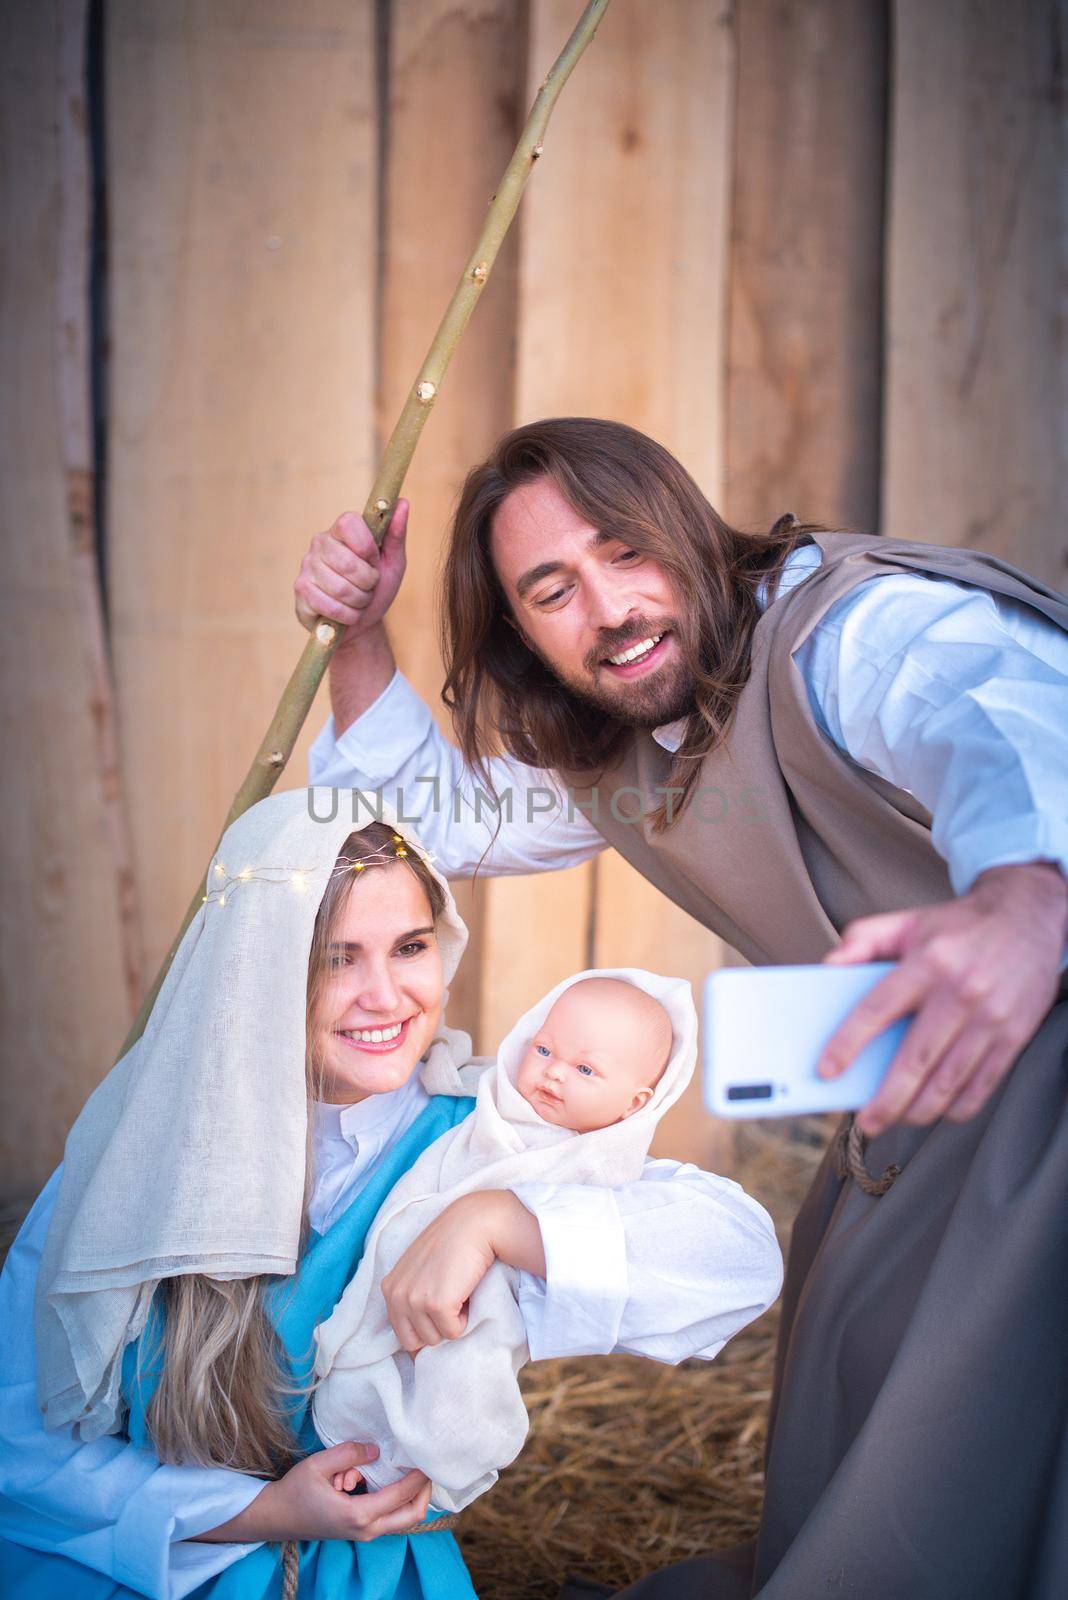 Vertical photo of characters of the virgin mary and joseph taking a selfie while smiling in a crib